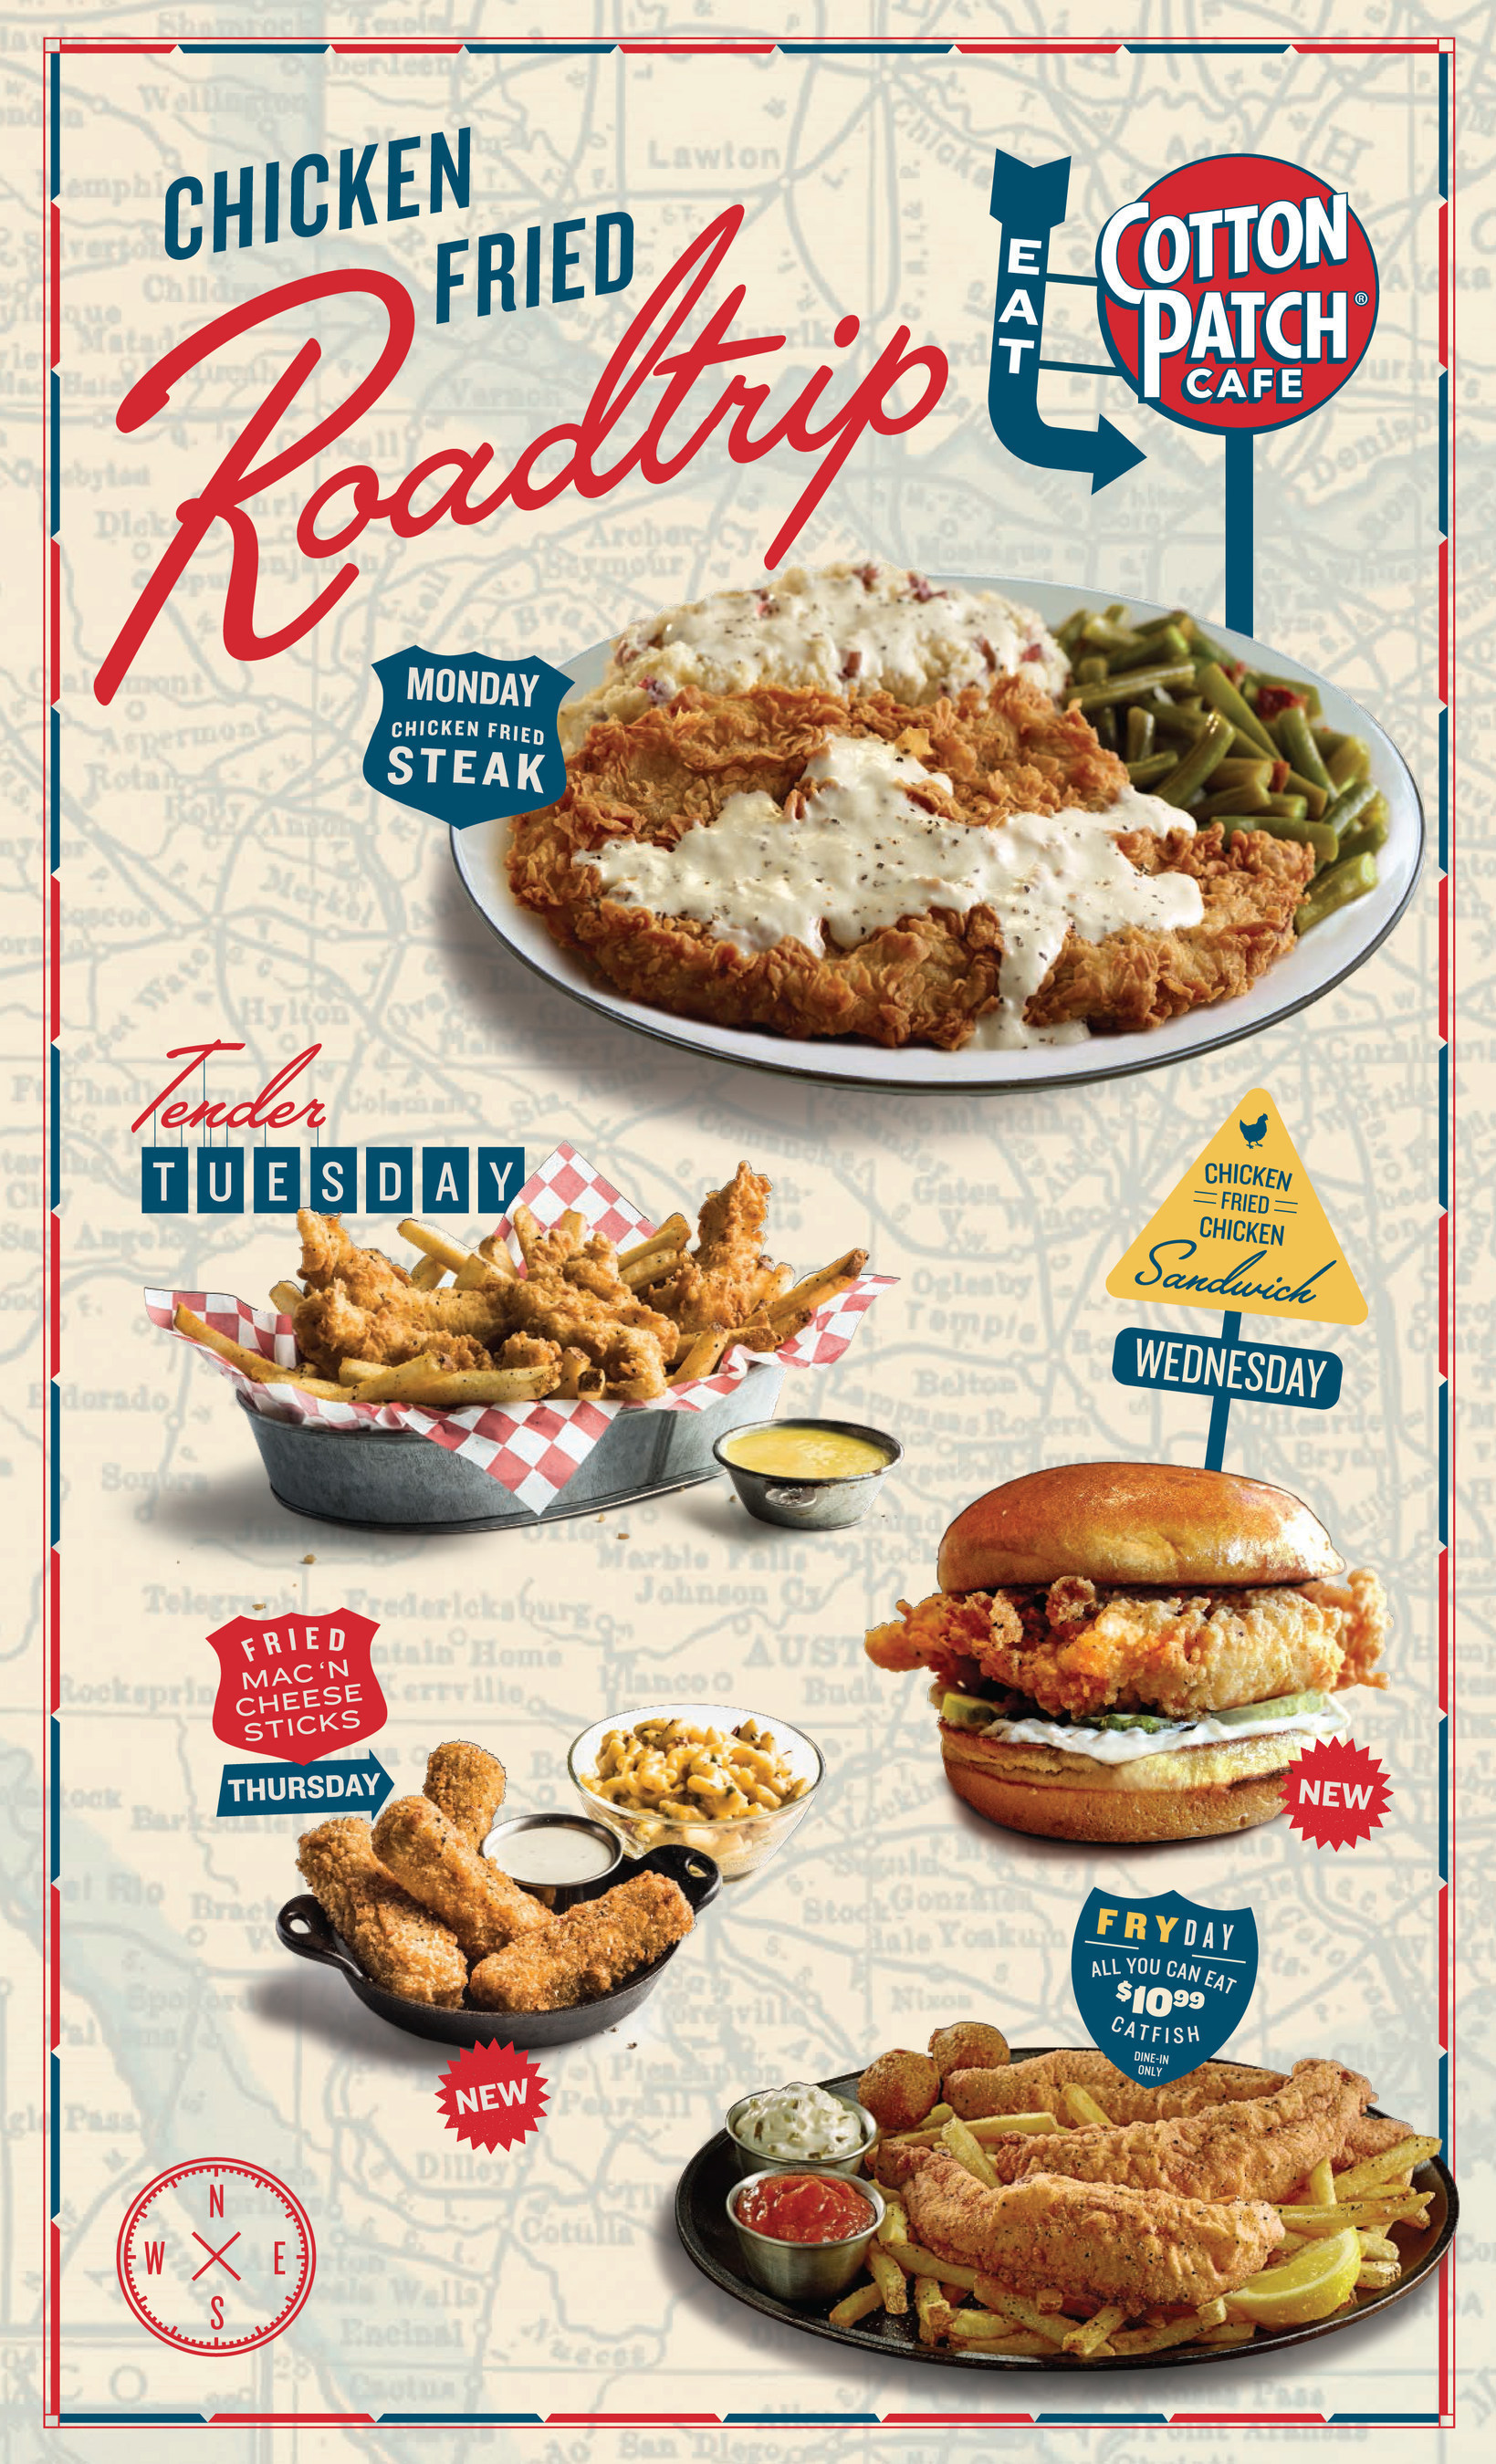 Cotton Patch Cafe launches Chicken Fried Road Trip August 15-October 30.